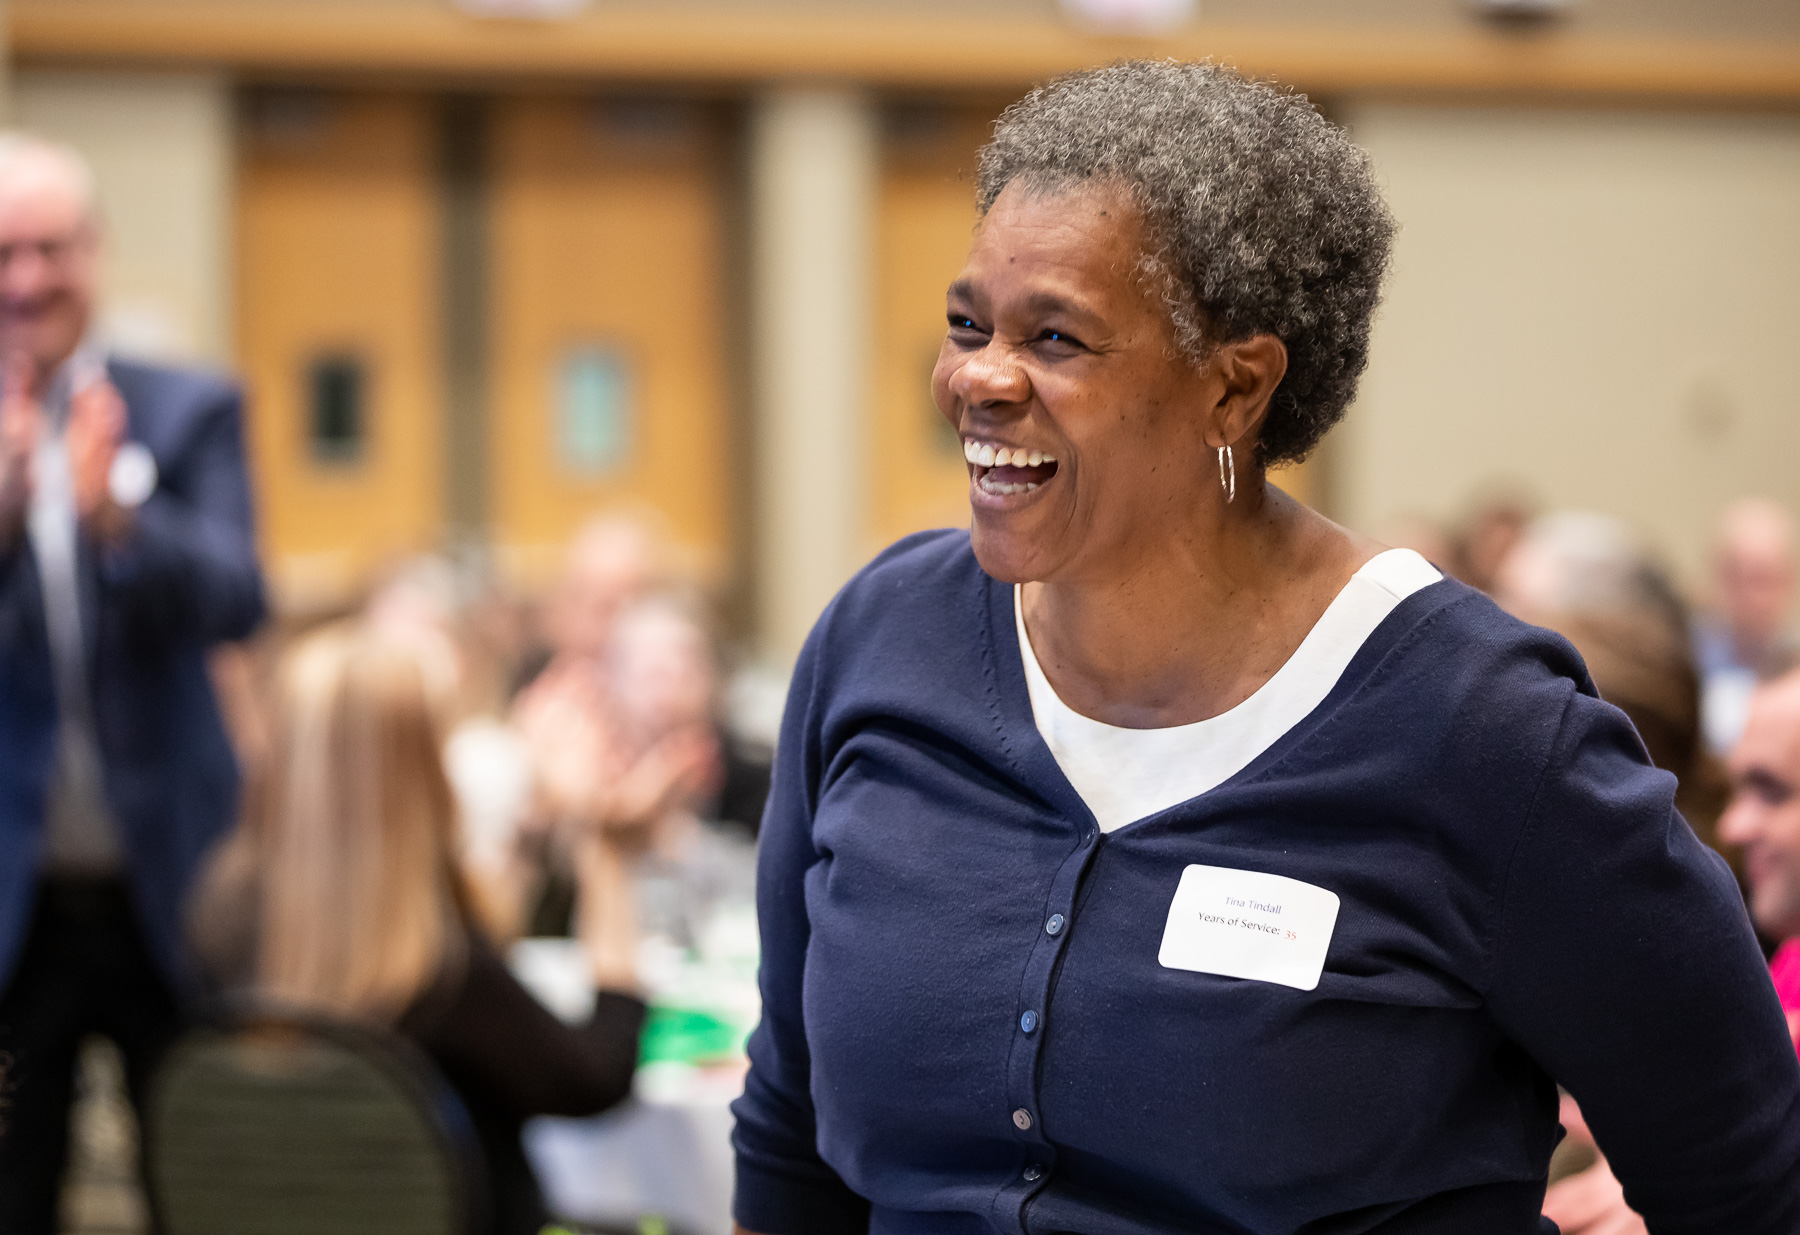 Tina Tindall stands to be recognized for her 35 years at DePaul.